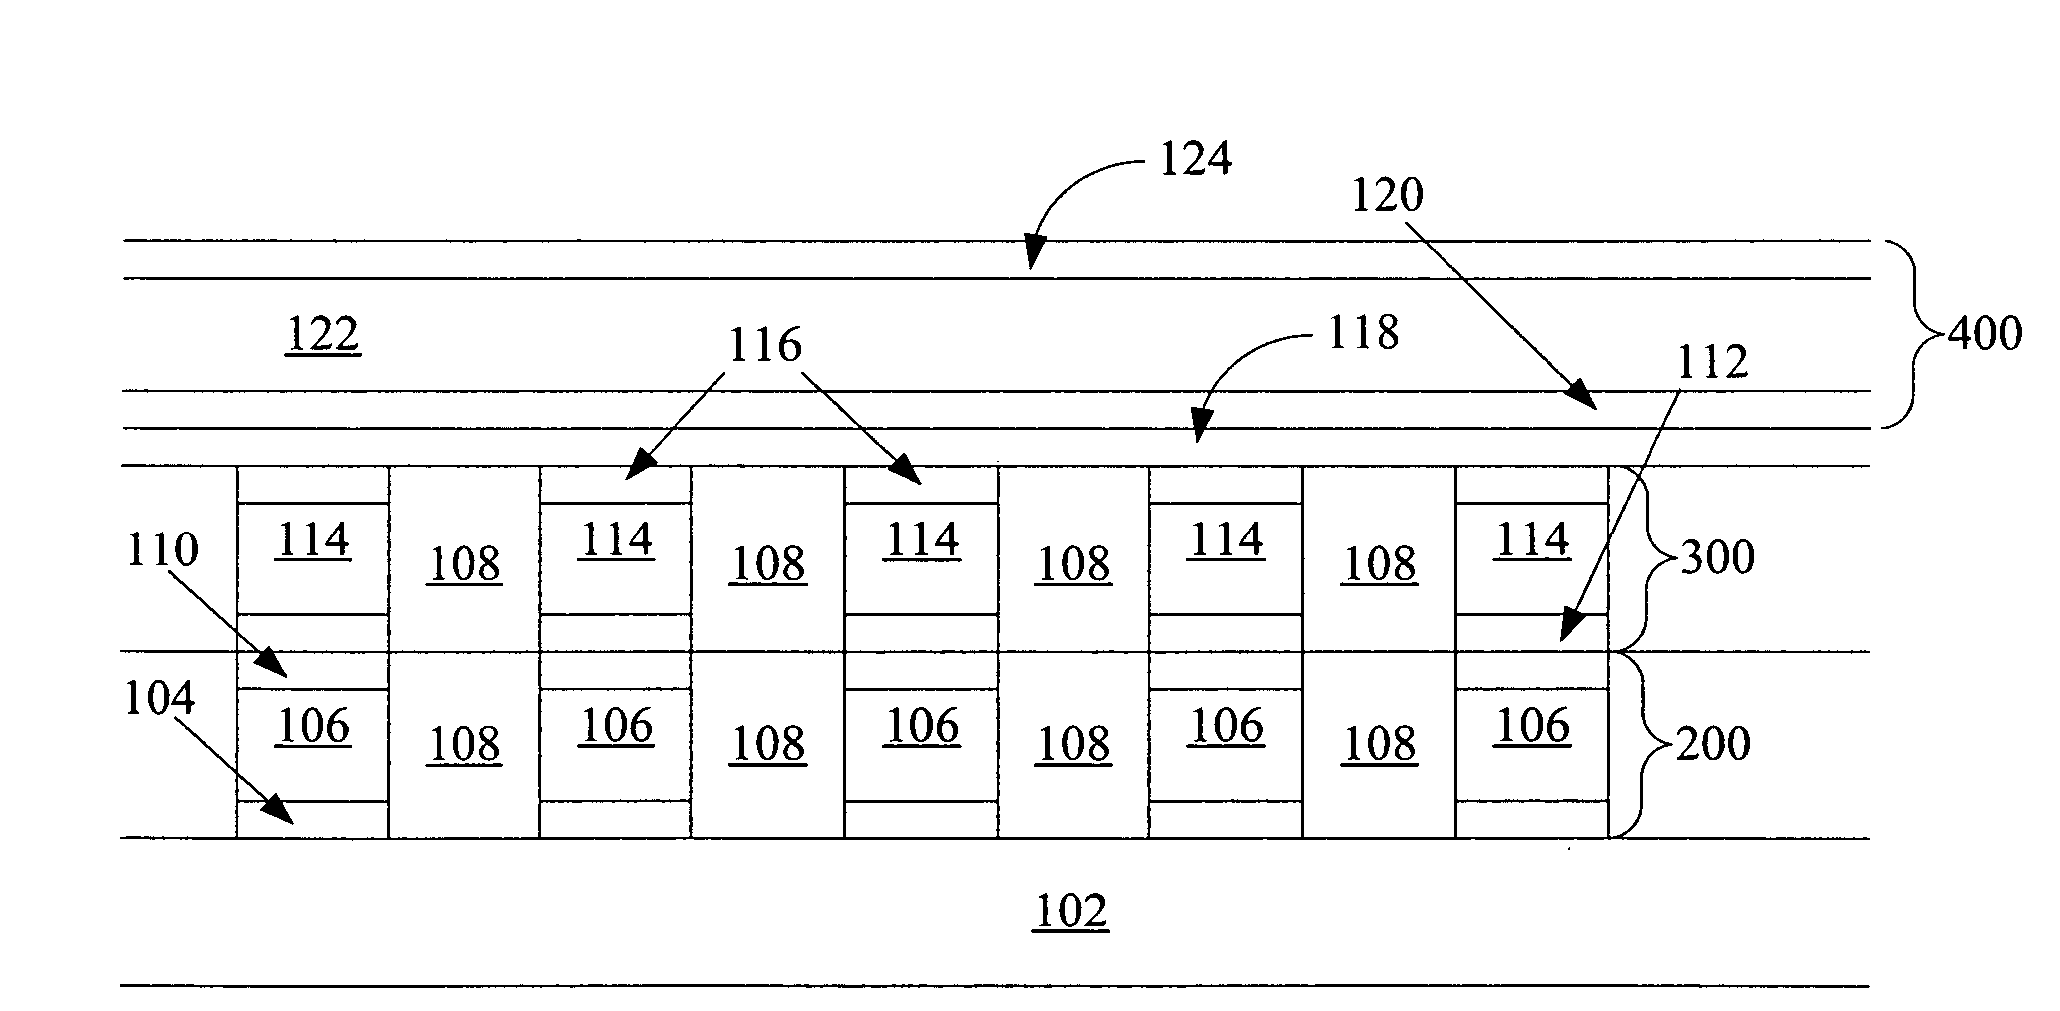 High-density nonvolatile memory array fabricated at low temperature comprising semiconductor diodes